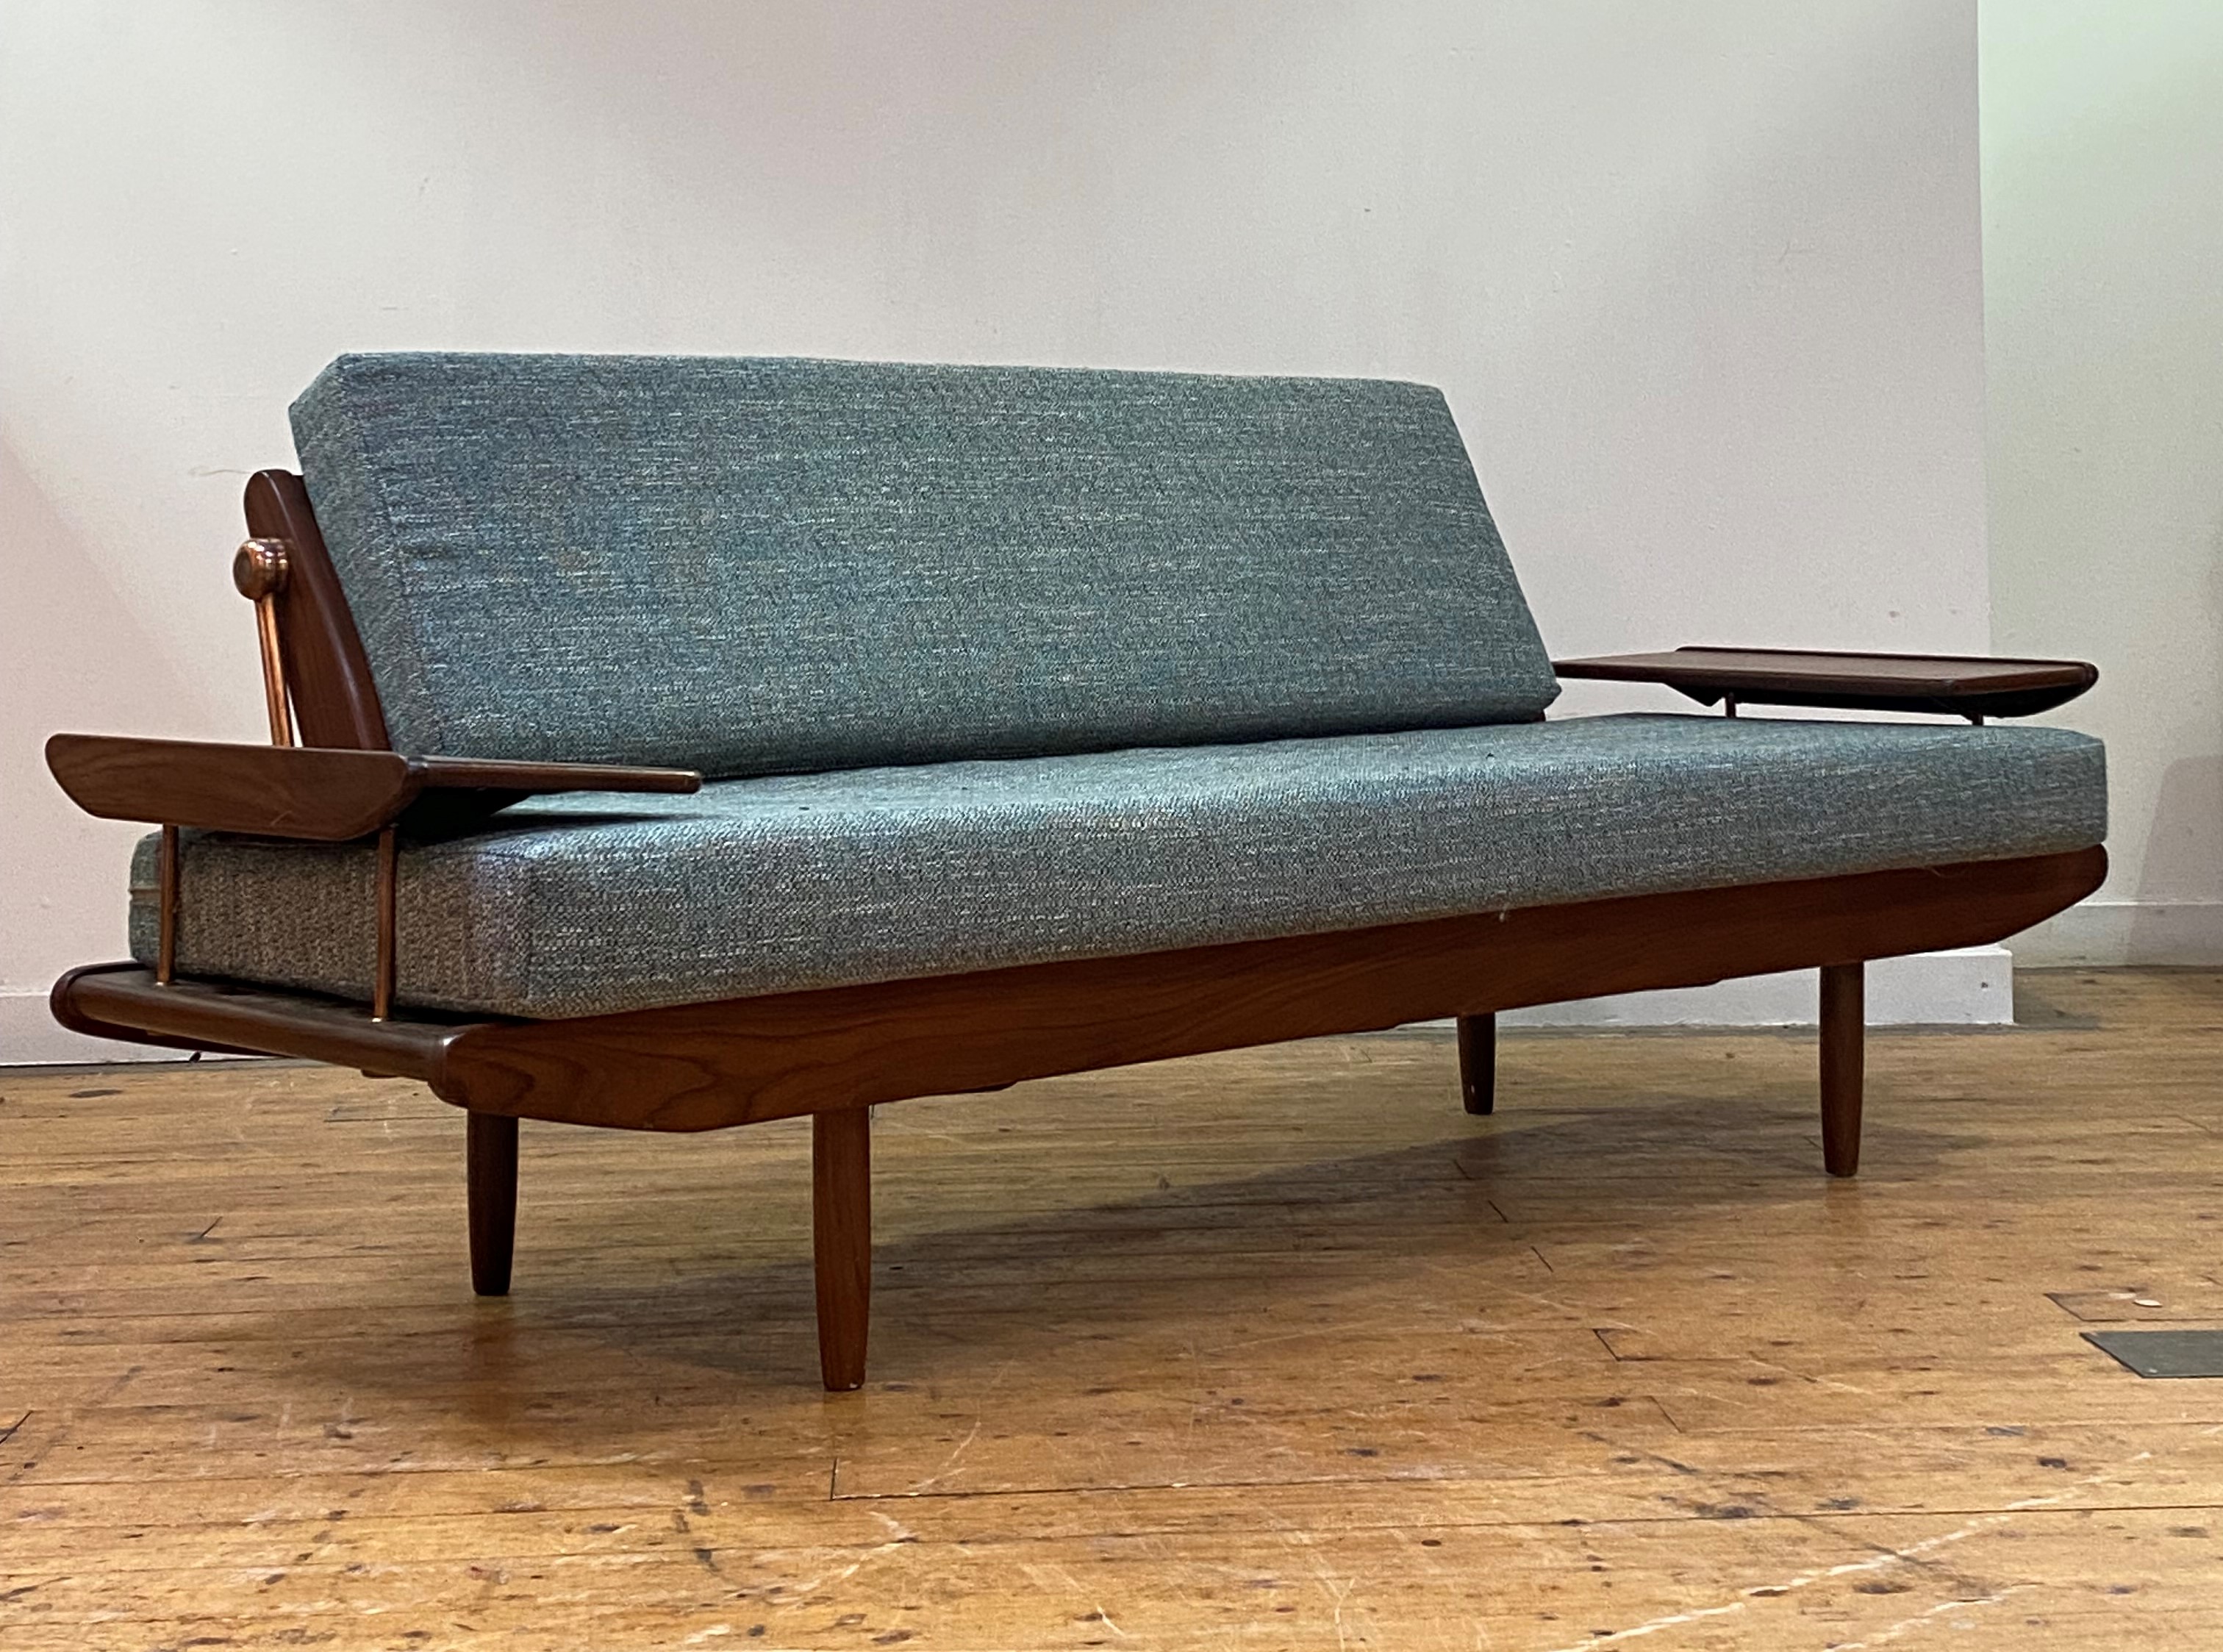 R.W.Toothill, a 1960s mid century afromosia teak and rose gilt brass Wentworth metamorphic sofa / - Image 2 of 3